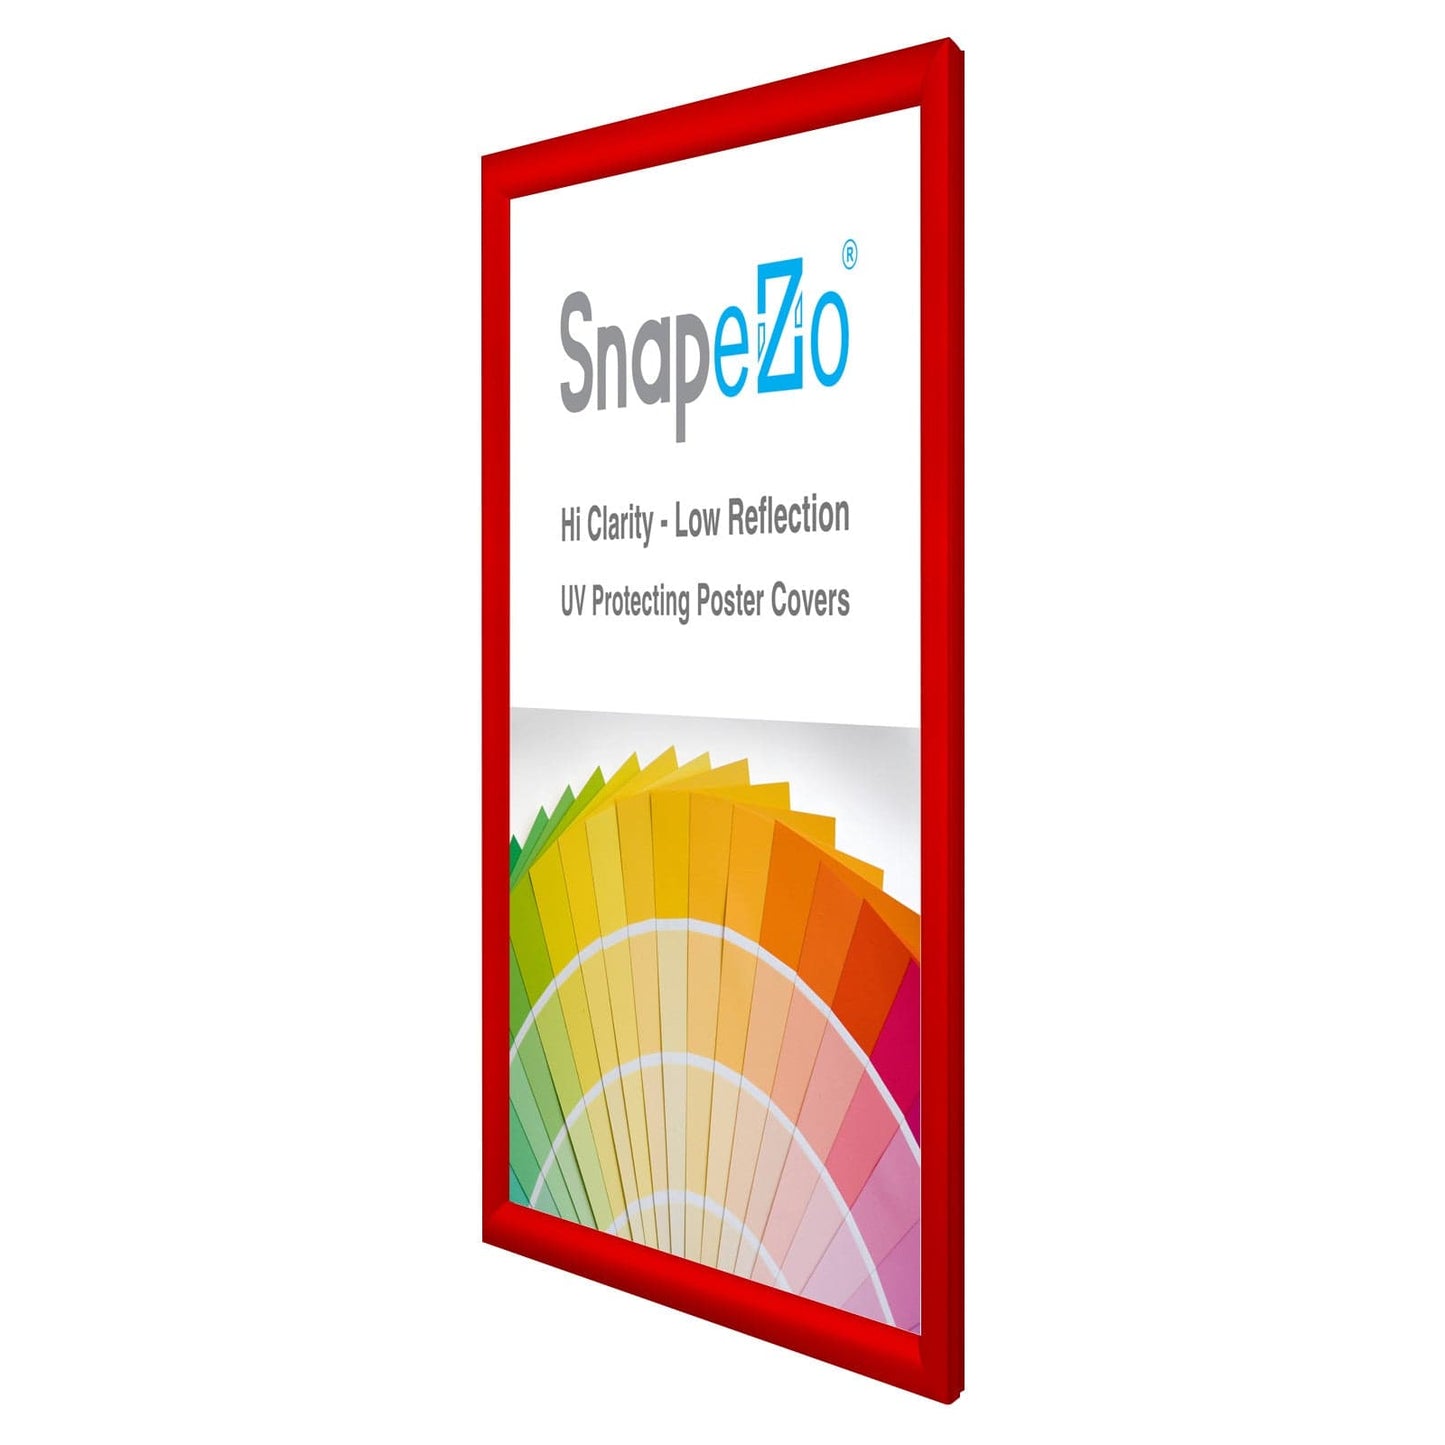 17x22 Red SnapeZo® Snap Frame - 1.2" Profile - Snap Frames Direct